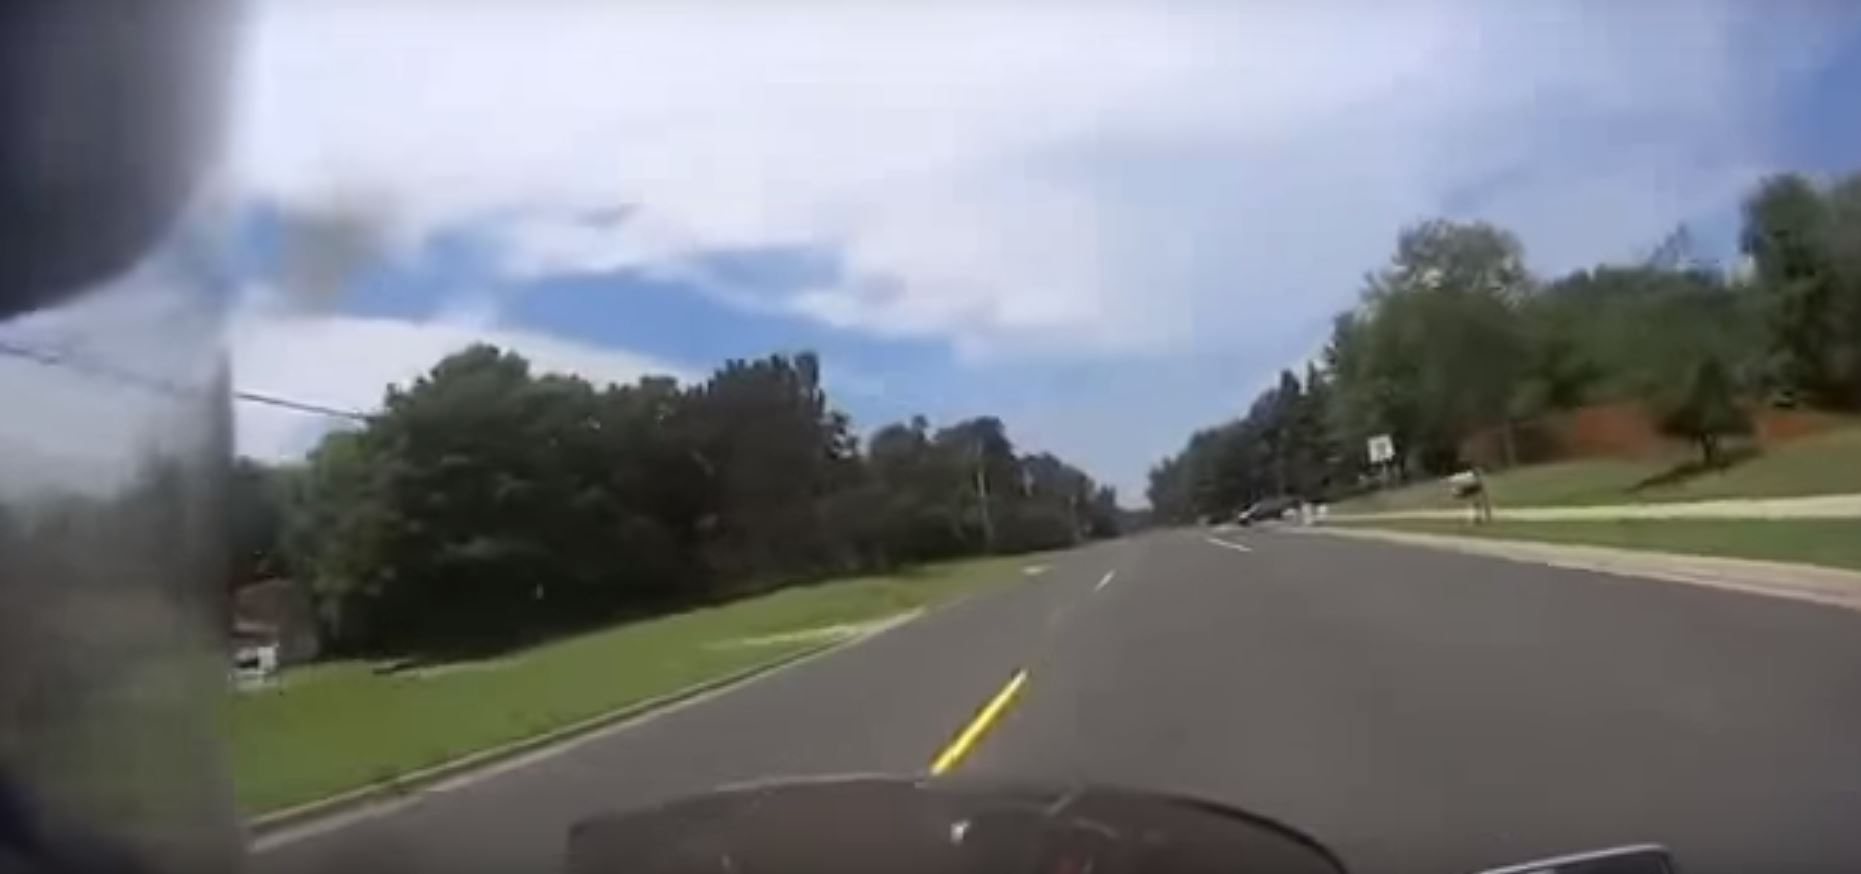 Reminds me of Road Rash for some reason. Credit: motika/YouTube